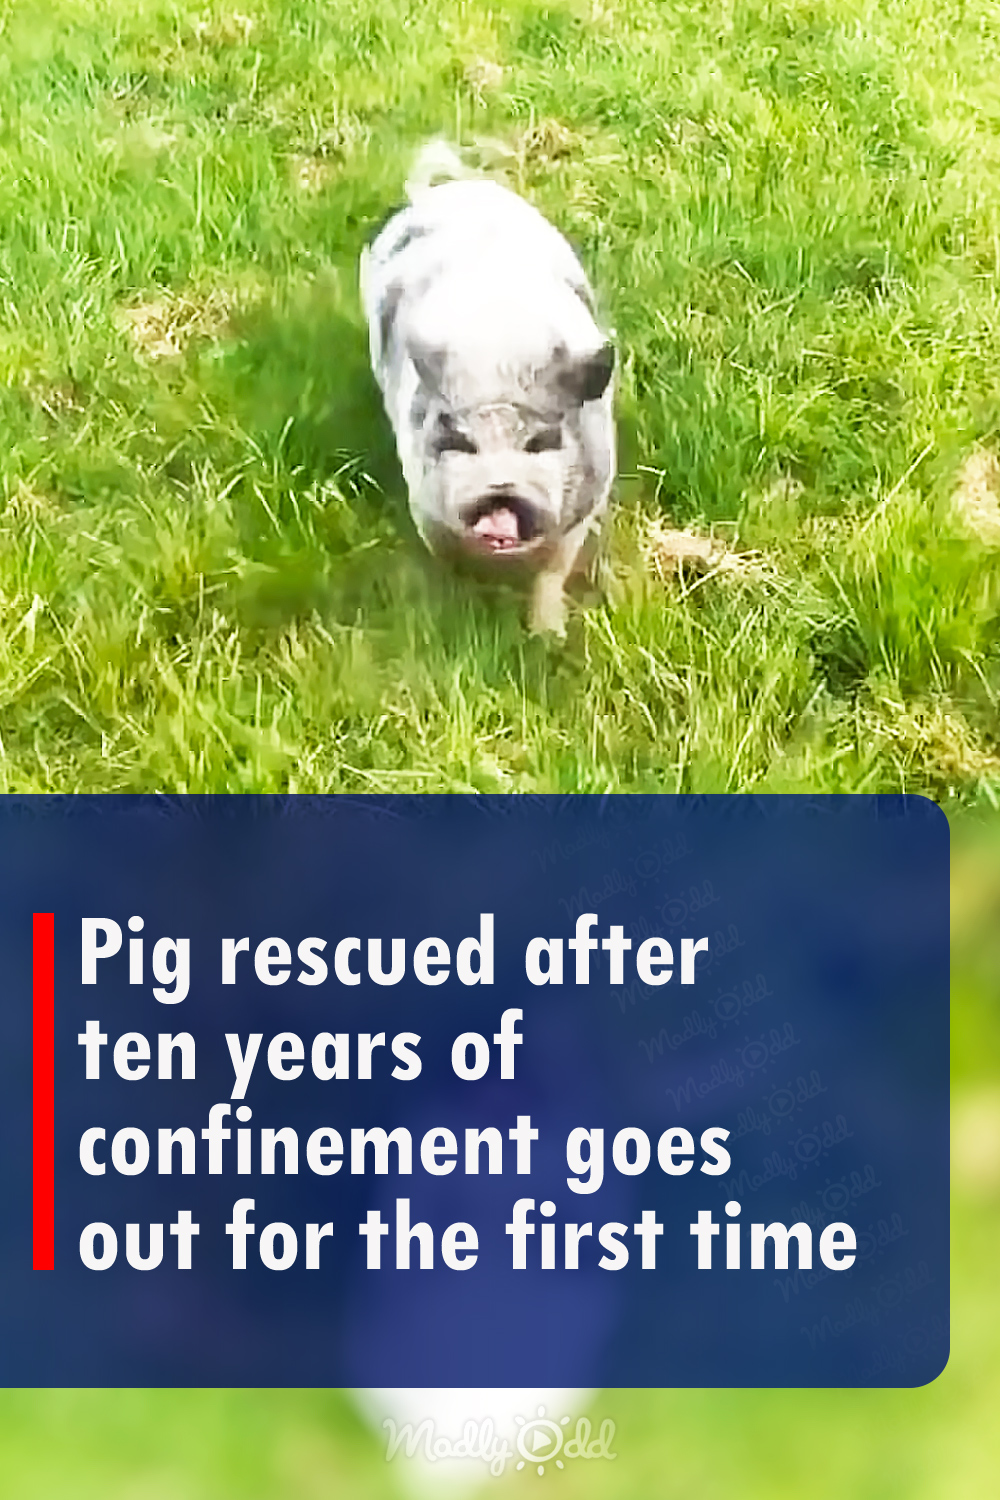 Pig rescued after ten years of confinement goes out for the first time